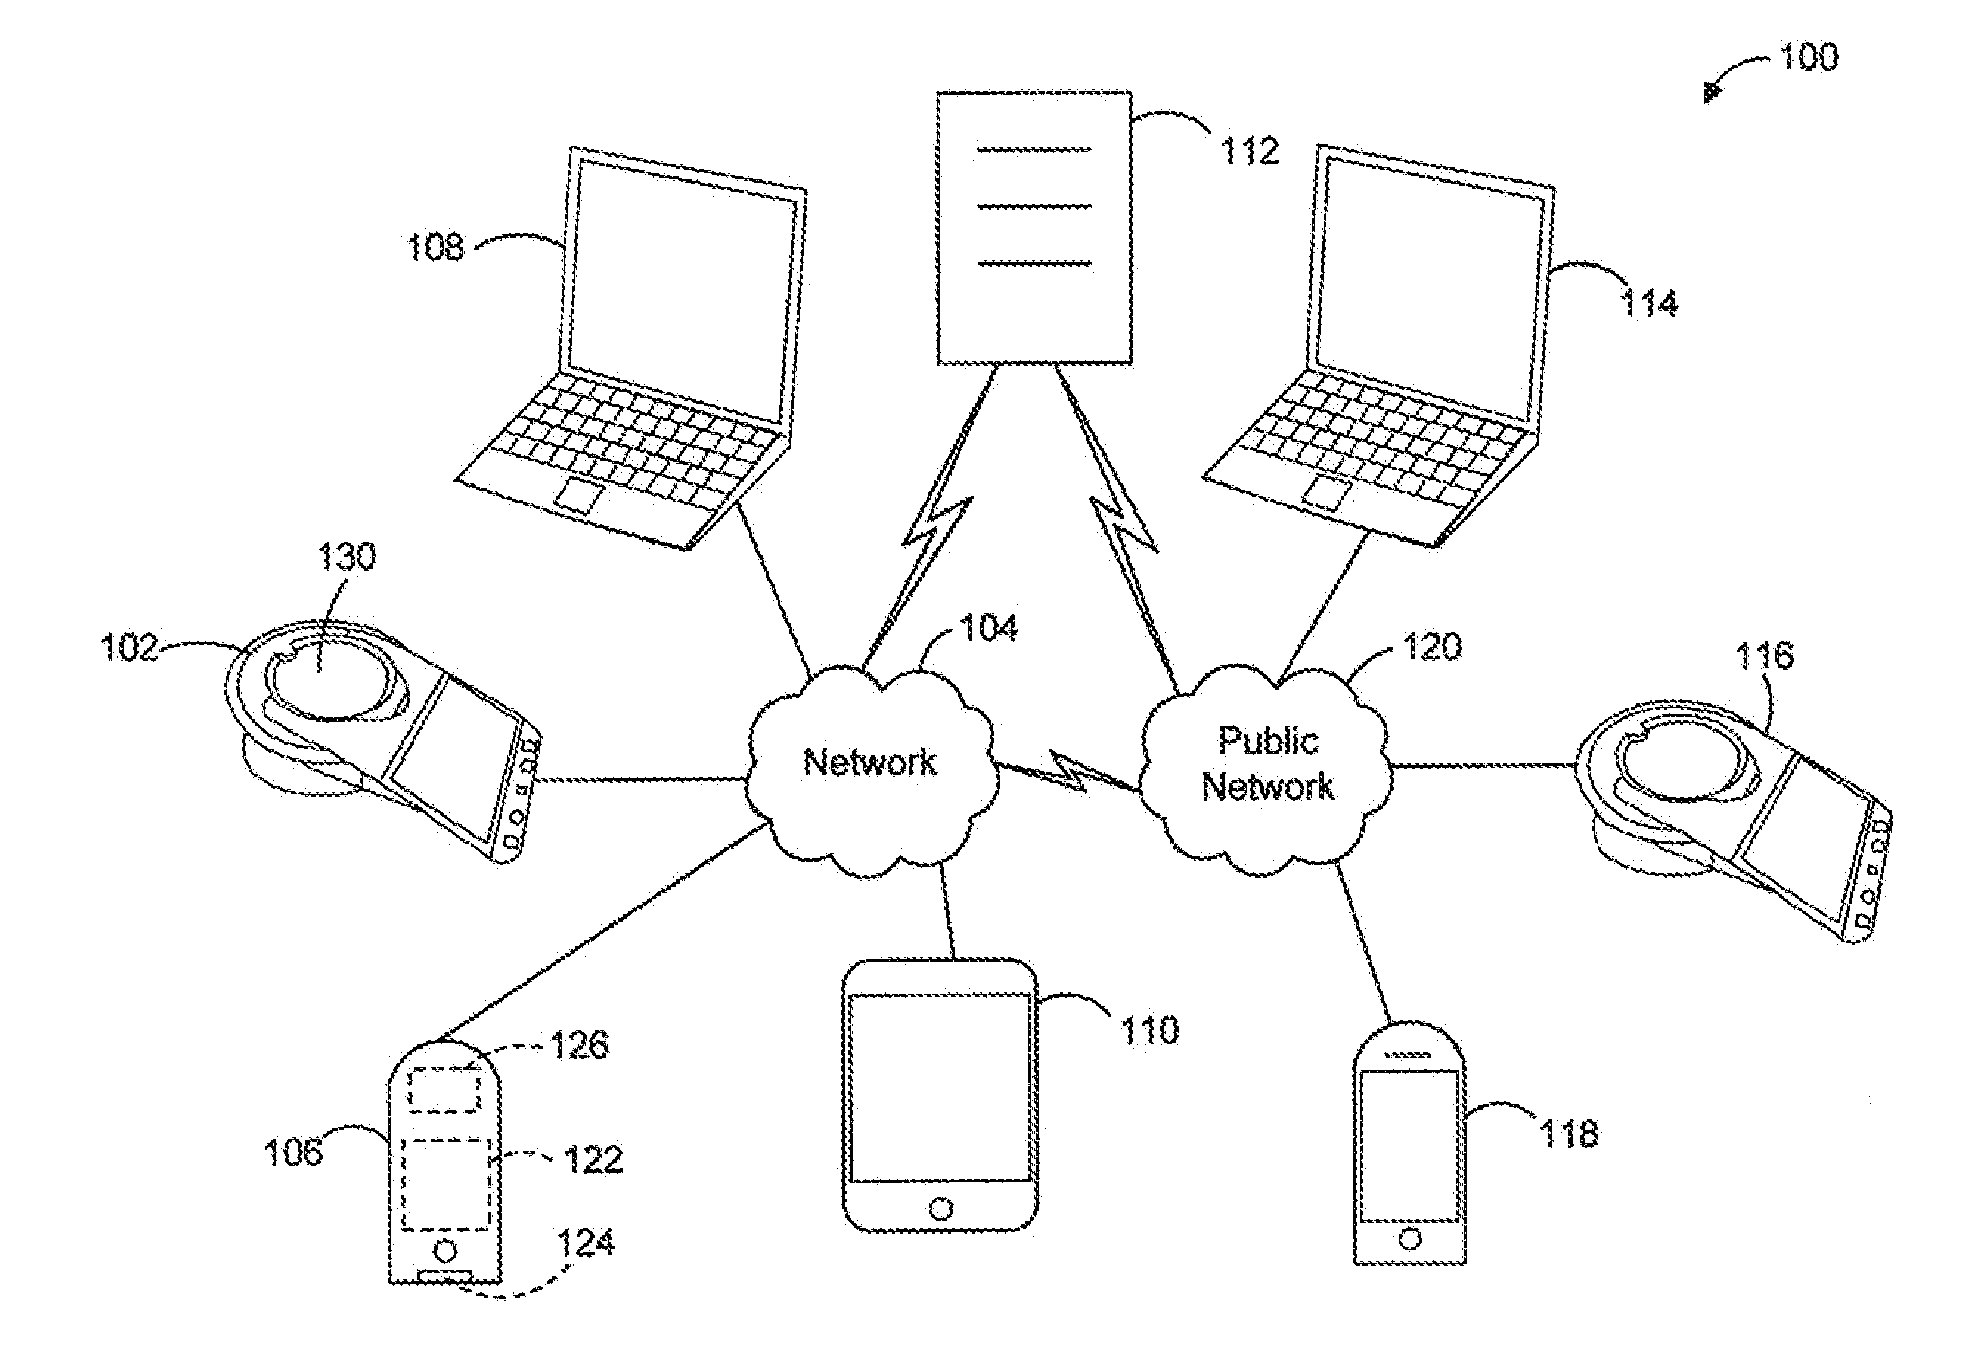 Conferencing System Including a Remote Microphone and Method of Using the Same